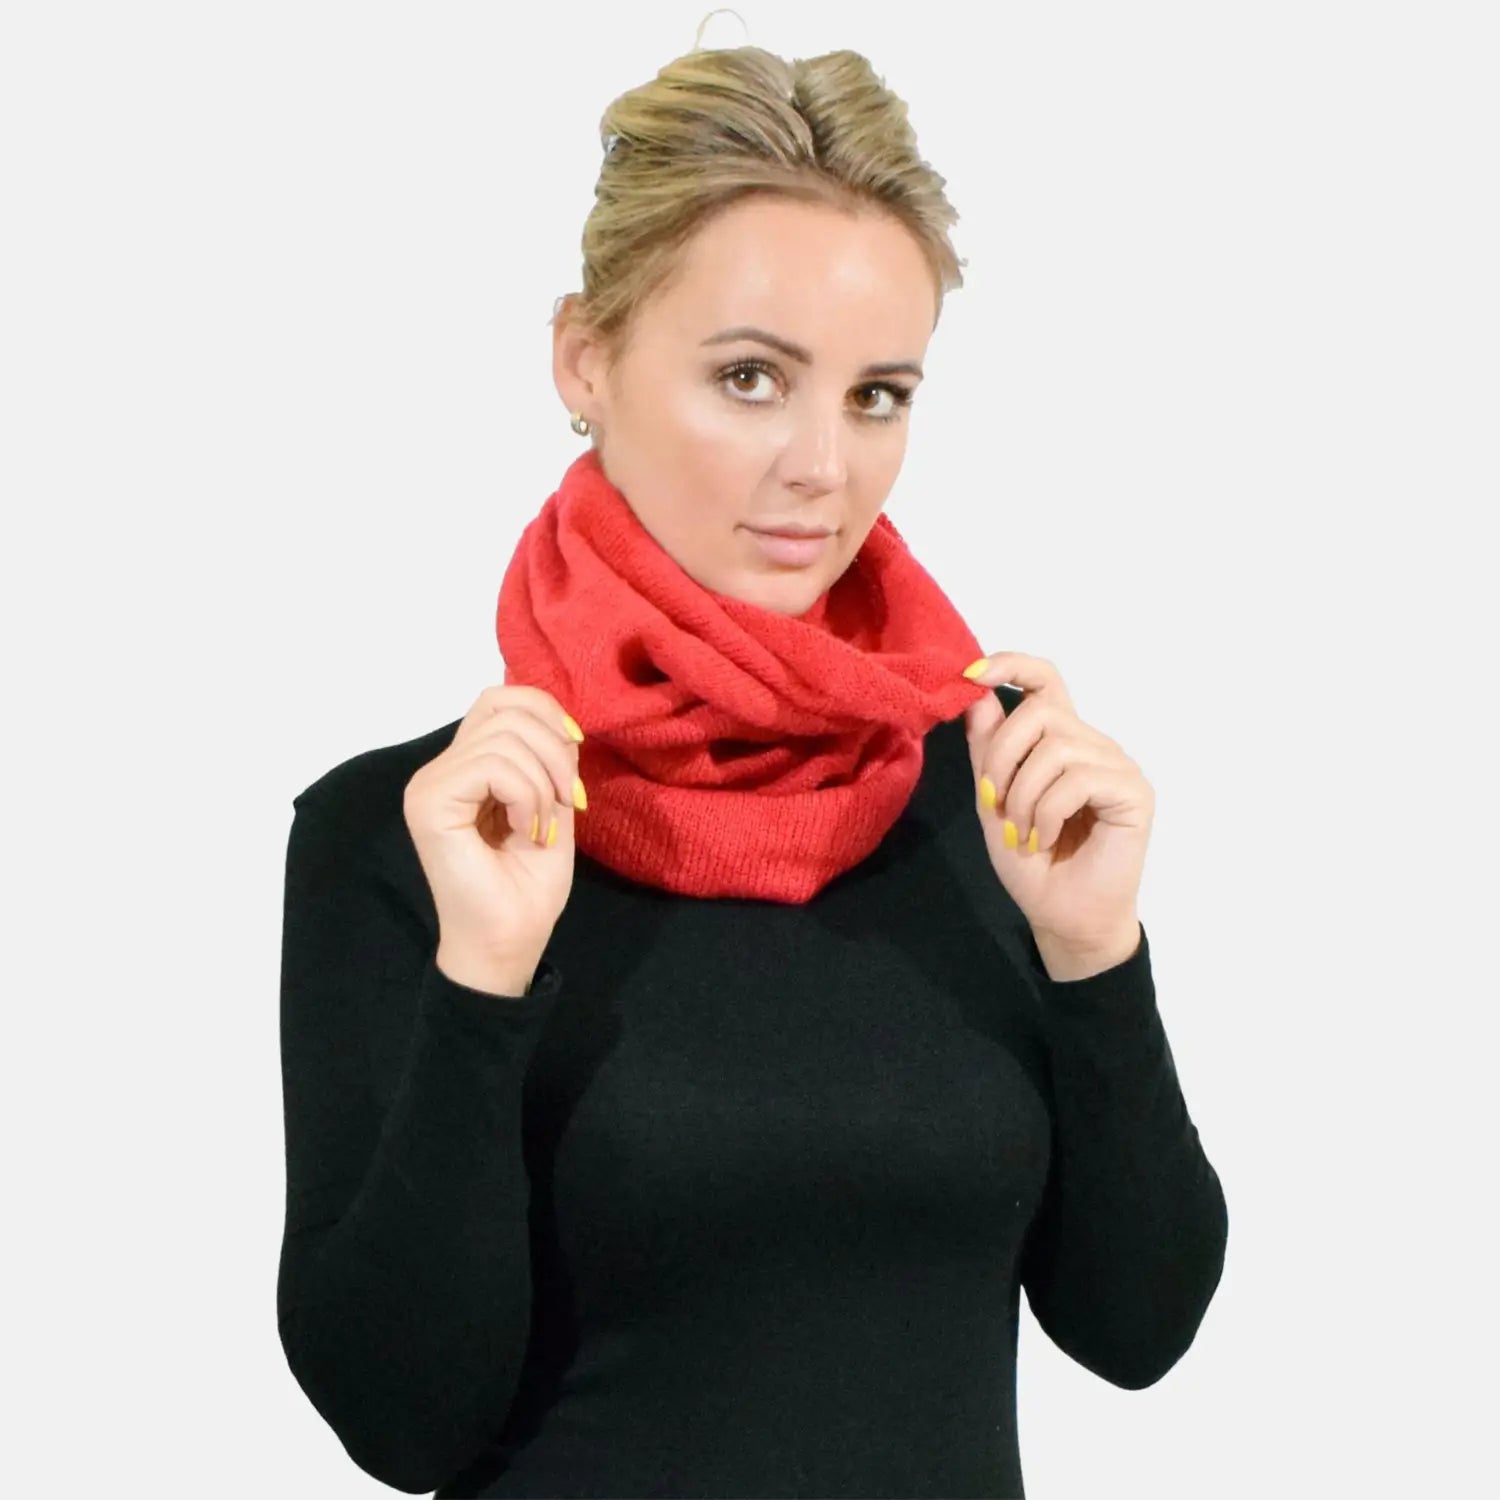 Unisex Winter Plain Knitted Long Tube Scarf: Woman in Red Scarf